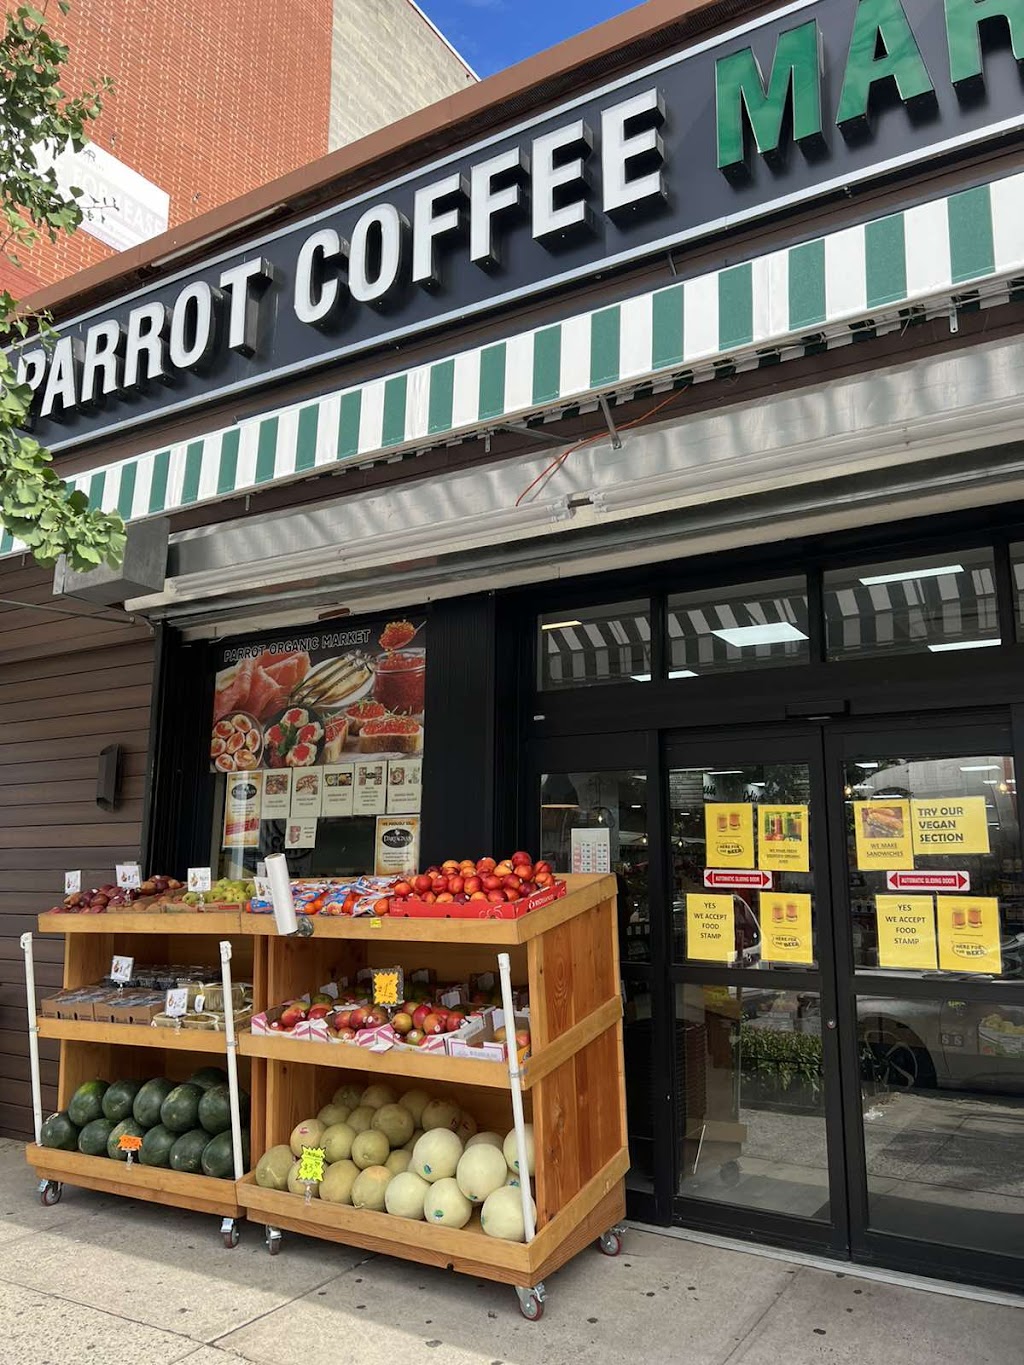 Parrot Coffee Market Place 2 | 47-11 Queens Blvd, Queens, NY 11104 | Phone: (718) 440-9228